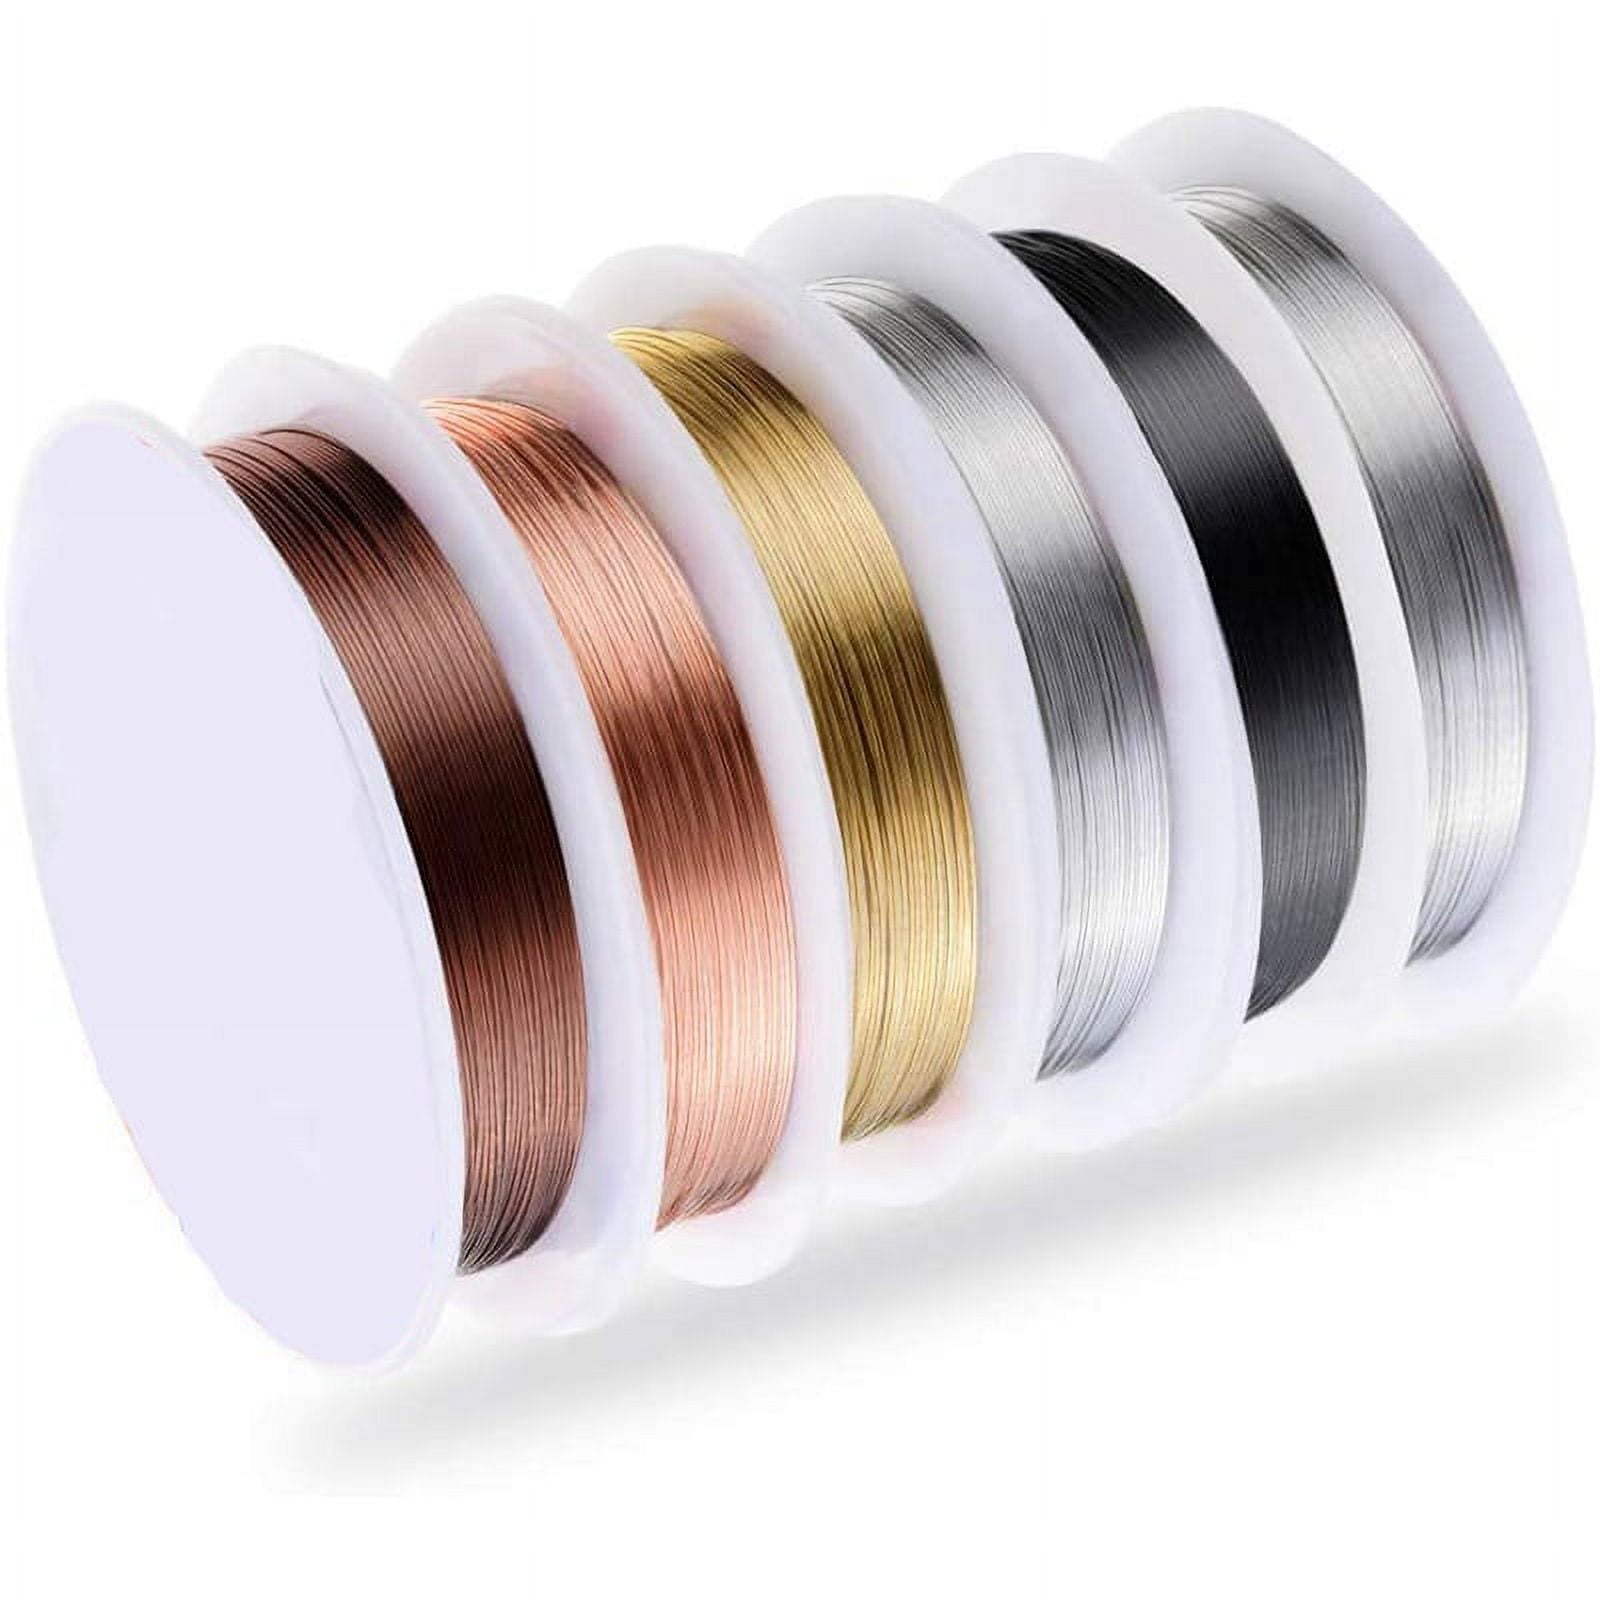 Jewelry Craft Aluminum Wire 22 Gauge 853Feet Bendable Metal Sculpting Wire  for Craft Floral Model Skeleton Making